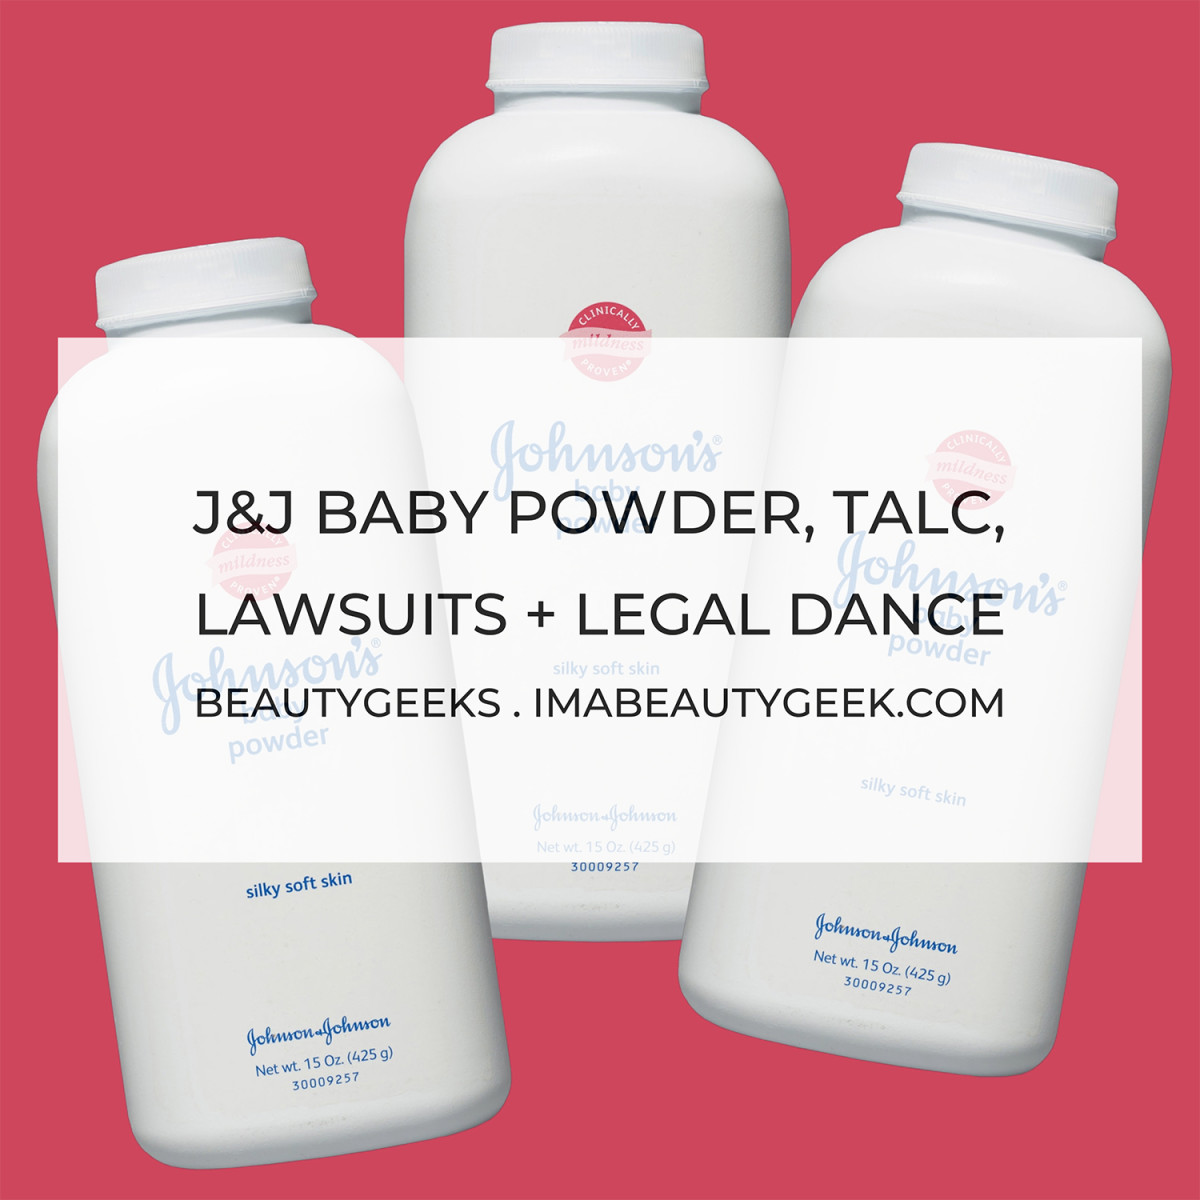 Johnson & Johnson has initiated a literally dodgy legal strategy to deal with current and future lawsuits in relation to their talc-based baby powder.